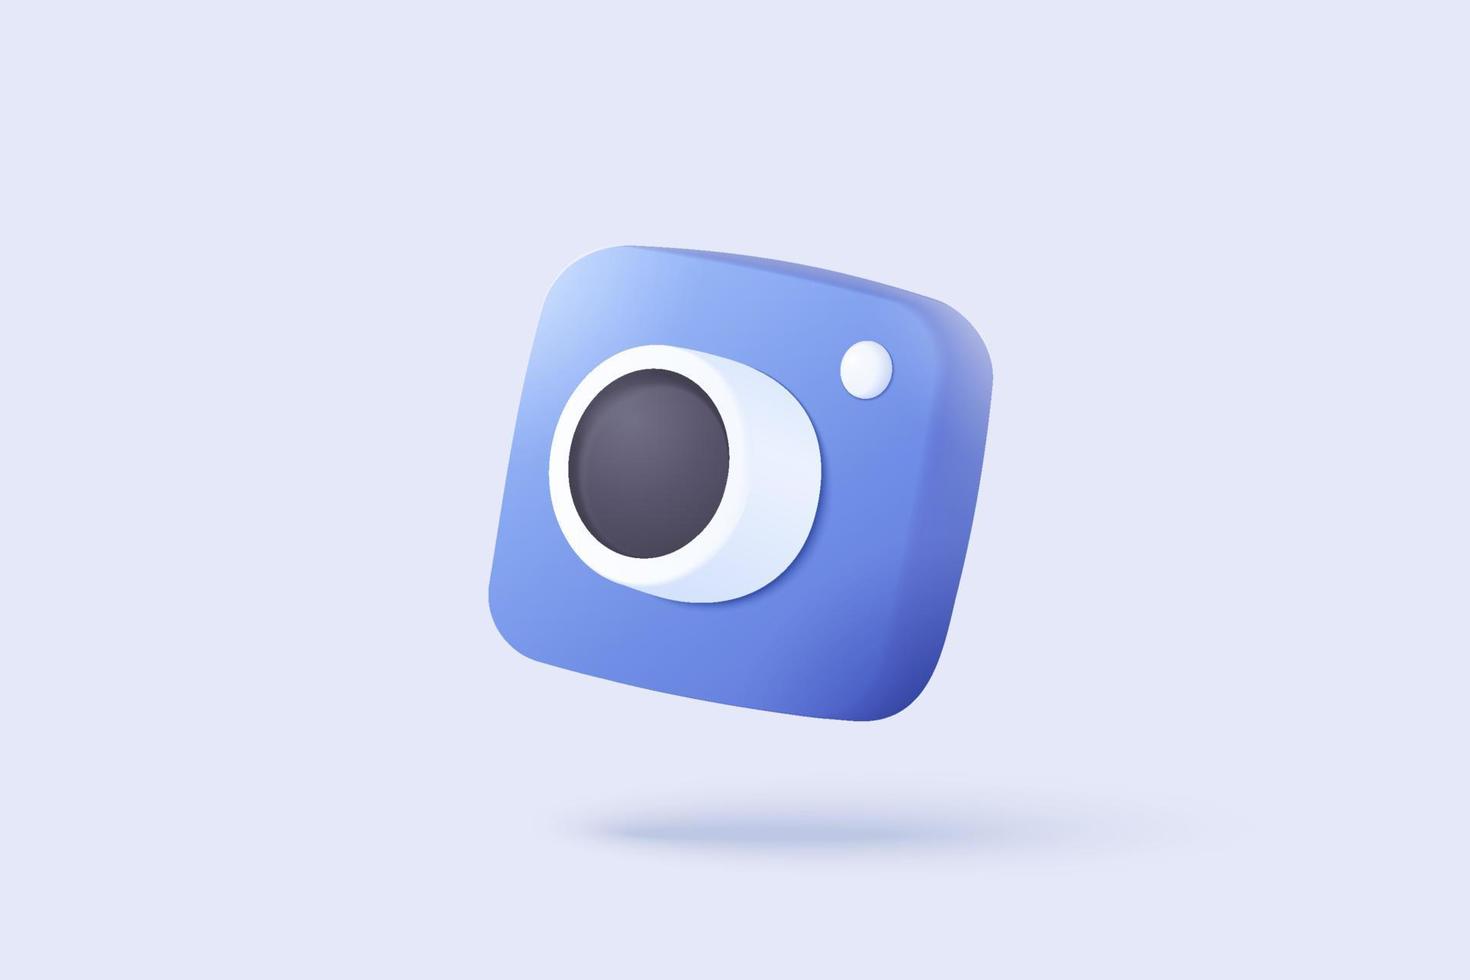 3d minimal photo camera with lens and button on pastel background with shadow. 3d simple snapshot camera icon concept. Volumetric design for creative photos. Lens isolated vector render illustration